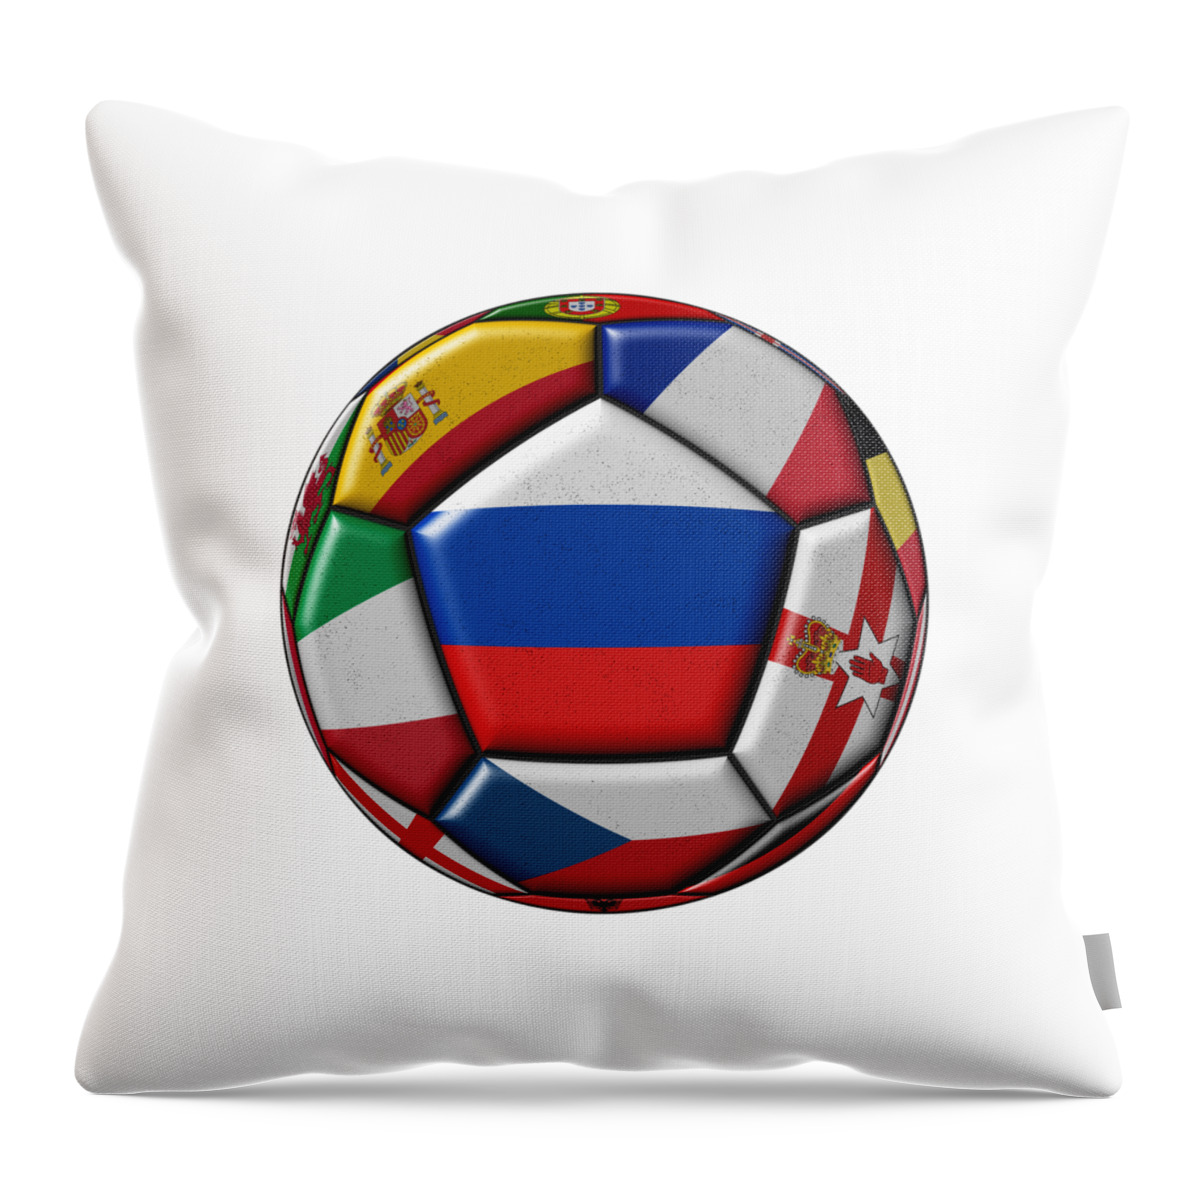 Europe Throw Pillow featuring the digital art Ball with flag of Russia in the center by Michal Boubin